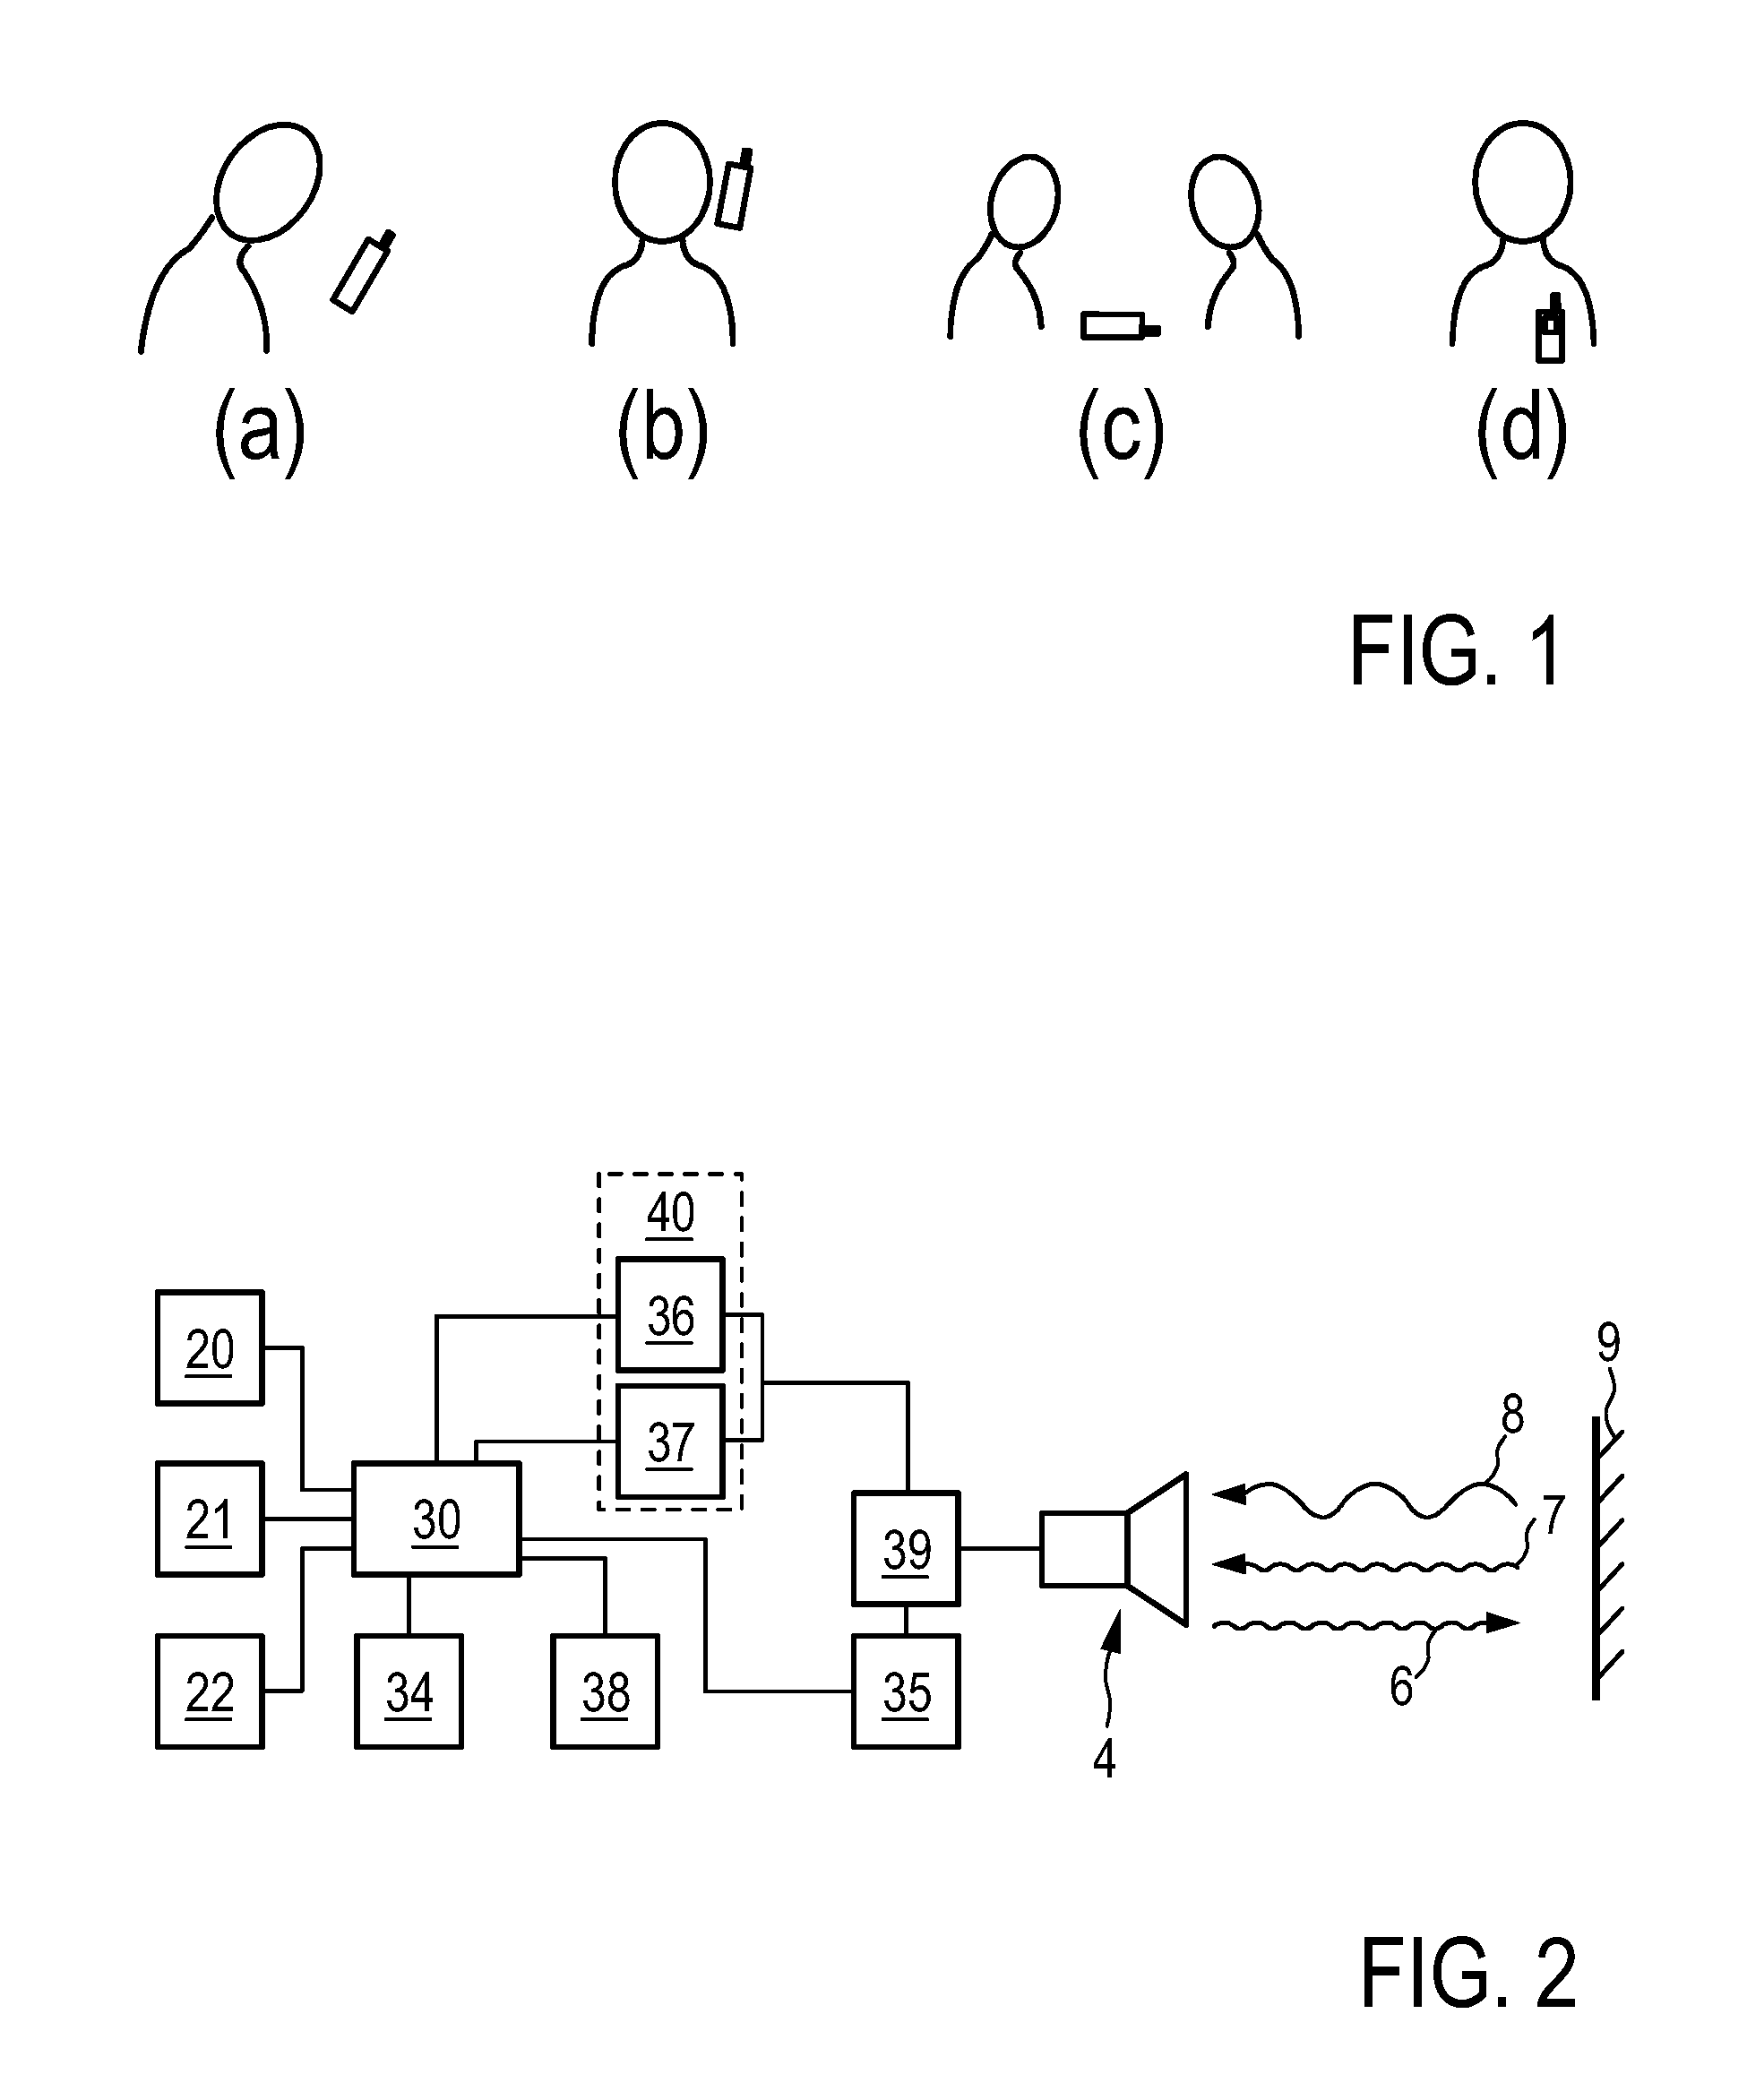 Proximity sensor, in particular microphone for reception of sound signals in the human audible sound range, with ultrasonic proximity estimation